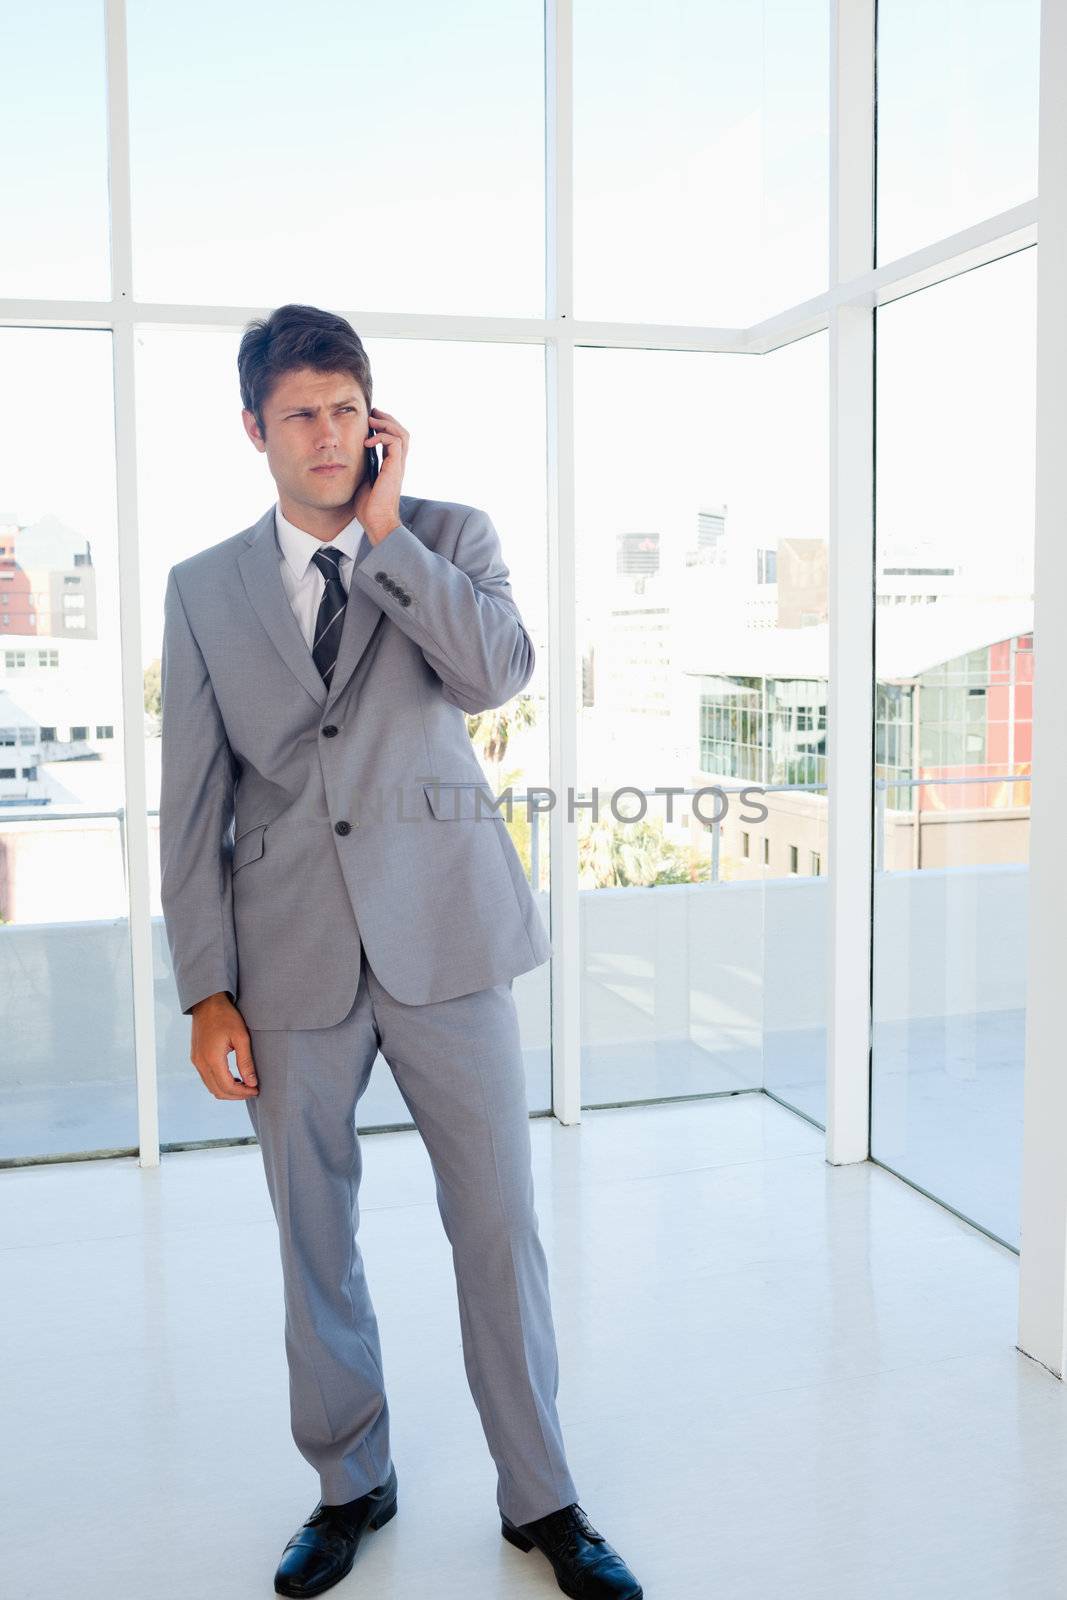 Stern executive on the phone in a bright room by Wavebreakmedia